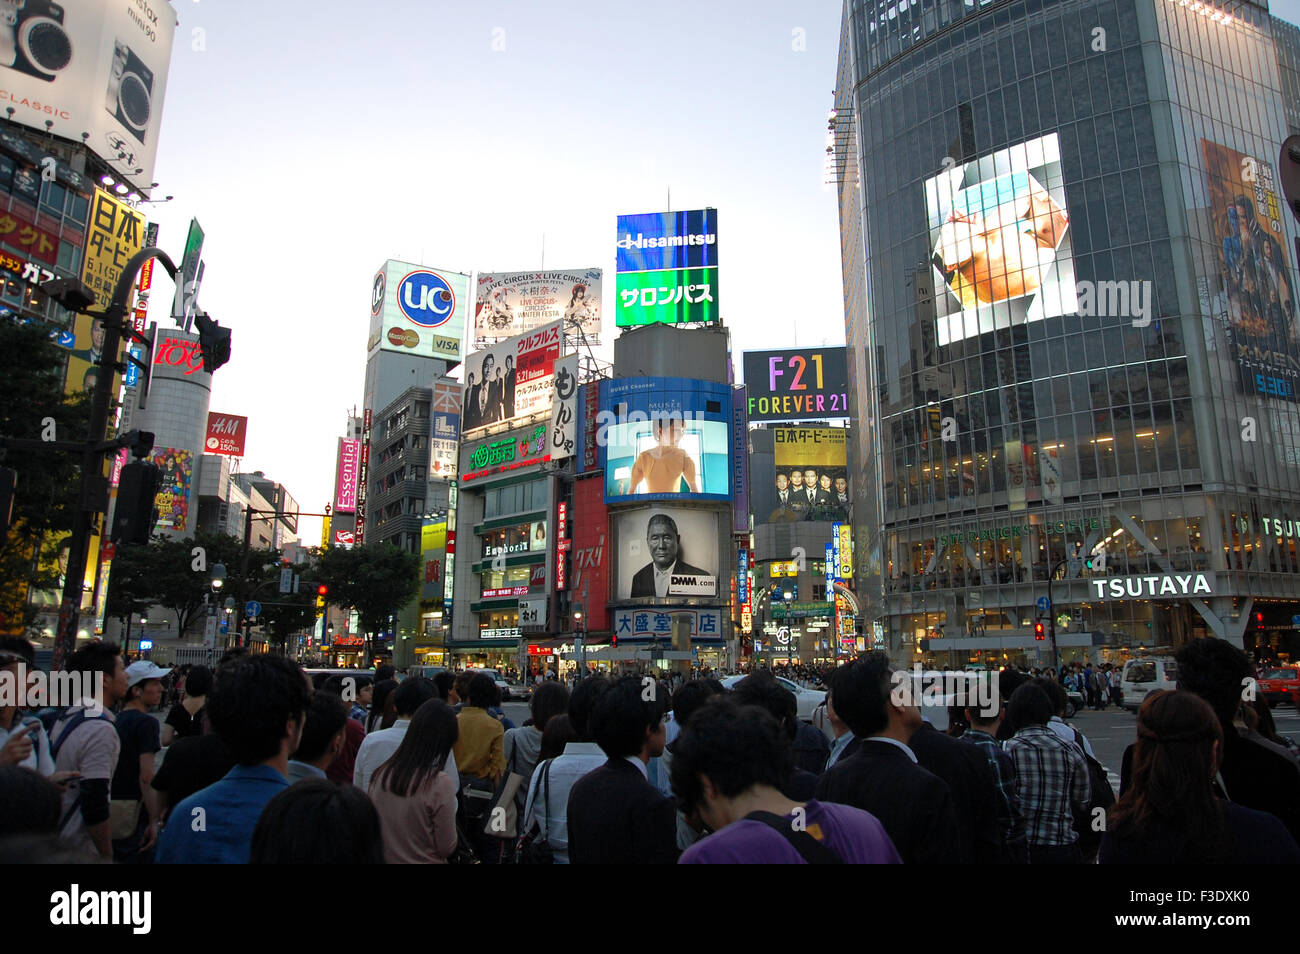 People waiting before the video screens and Tsutaya building to cross The Scramble intersection in Shibuya, Japan. Stock Photo